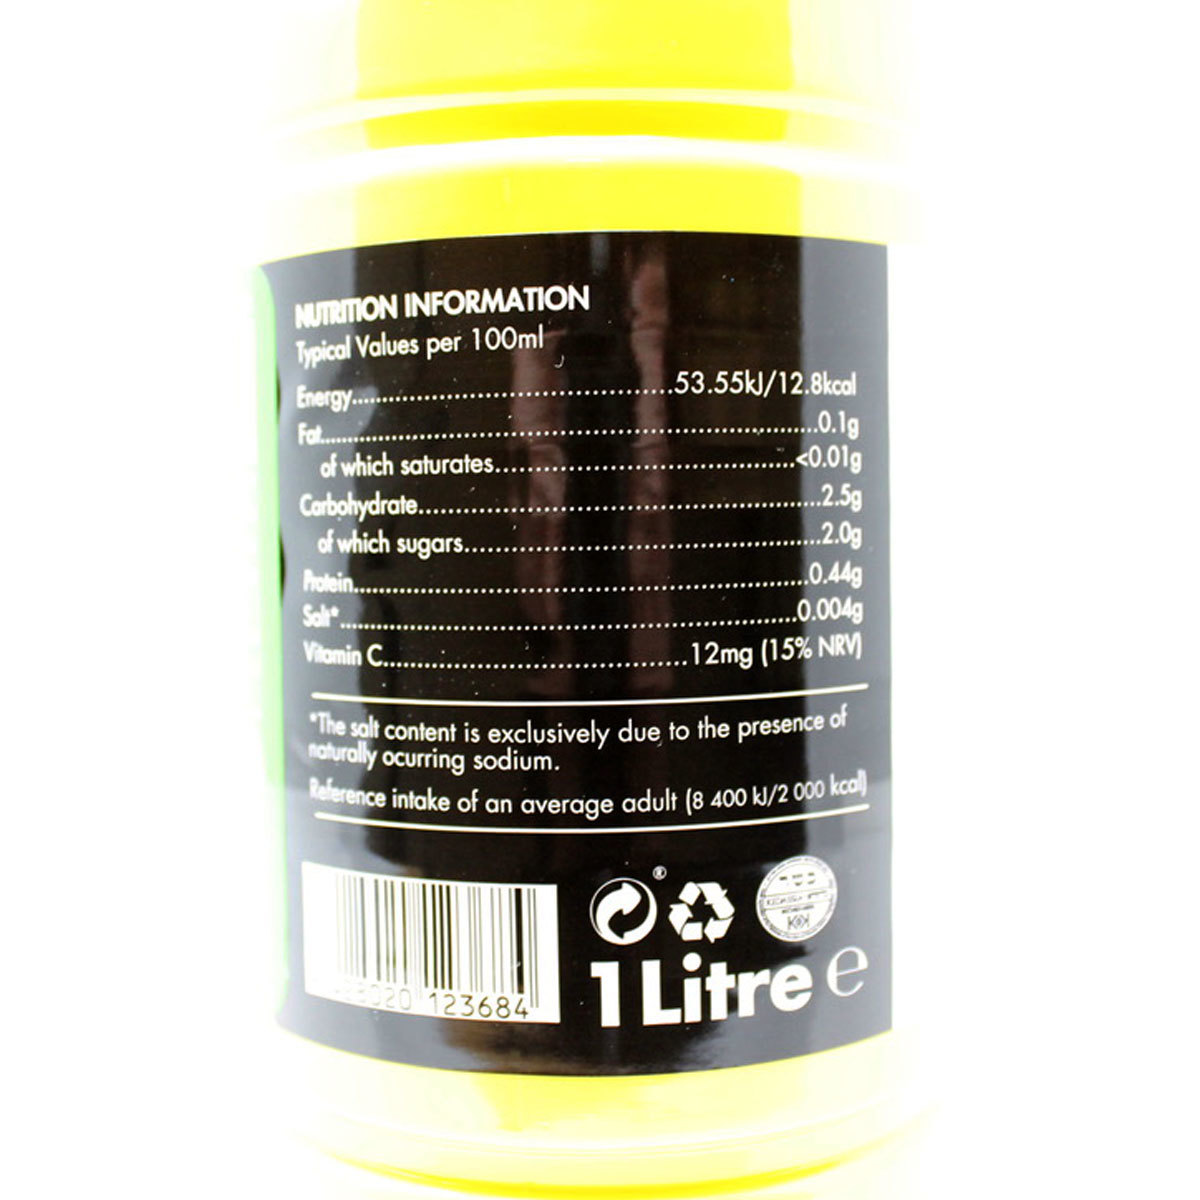 Quicklemon Juice Not from Concentrate, 2 x 1L